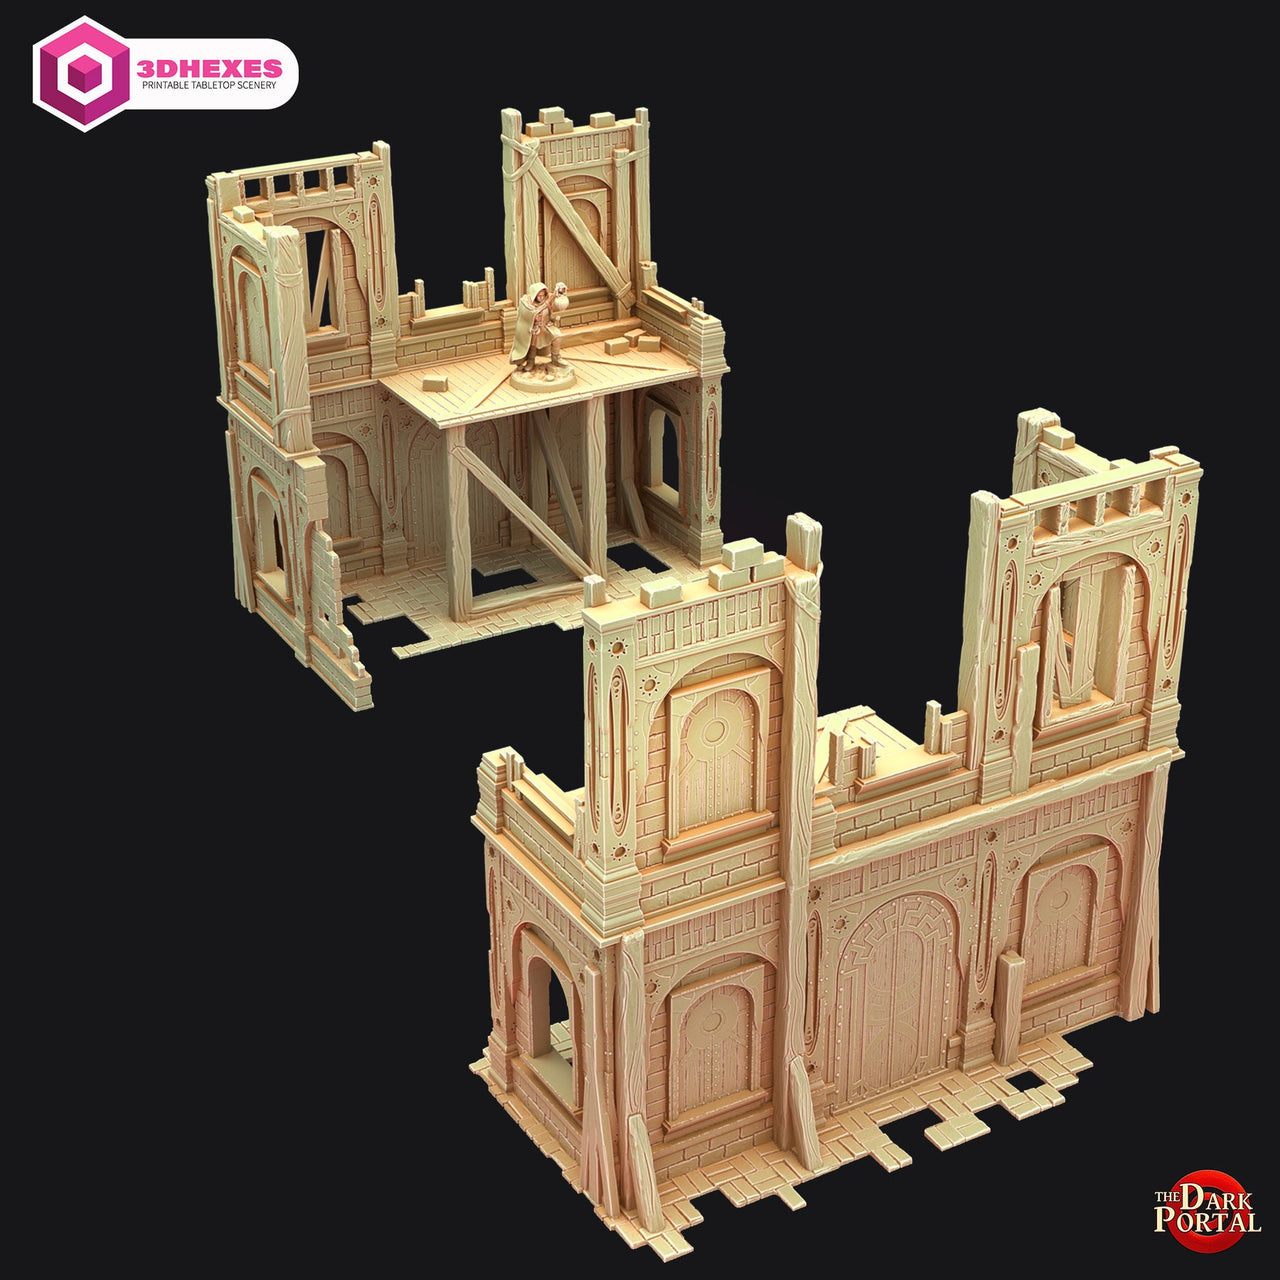 Two Story Building - Echoes of the Dark Portal by 3dHexes | Ancient Ruins Terrain for Roleplaying and Gaming | Filament | Temple